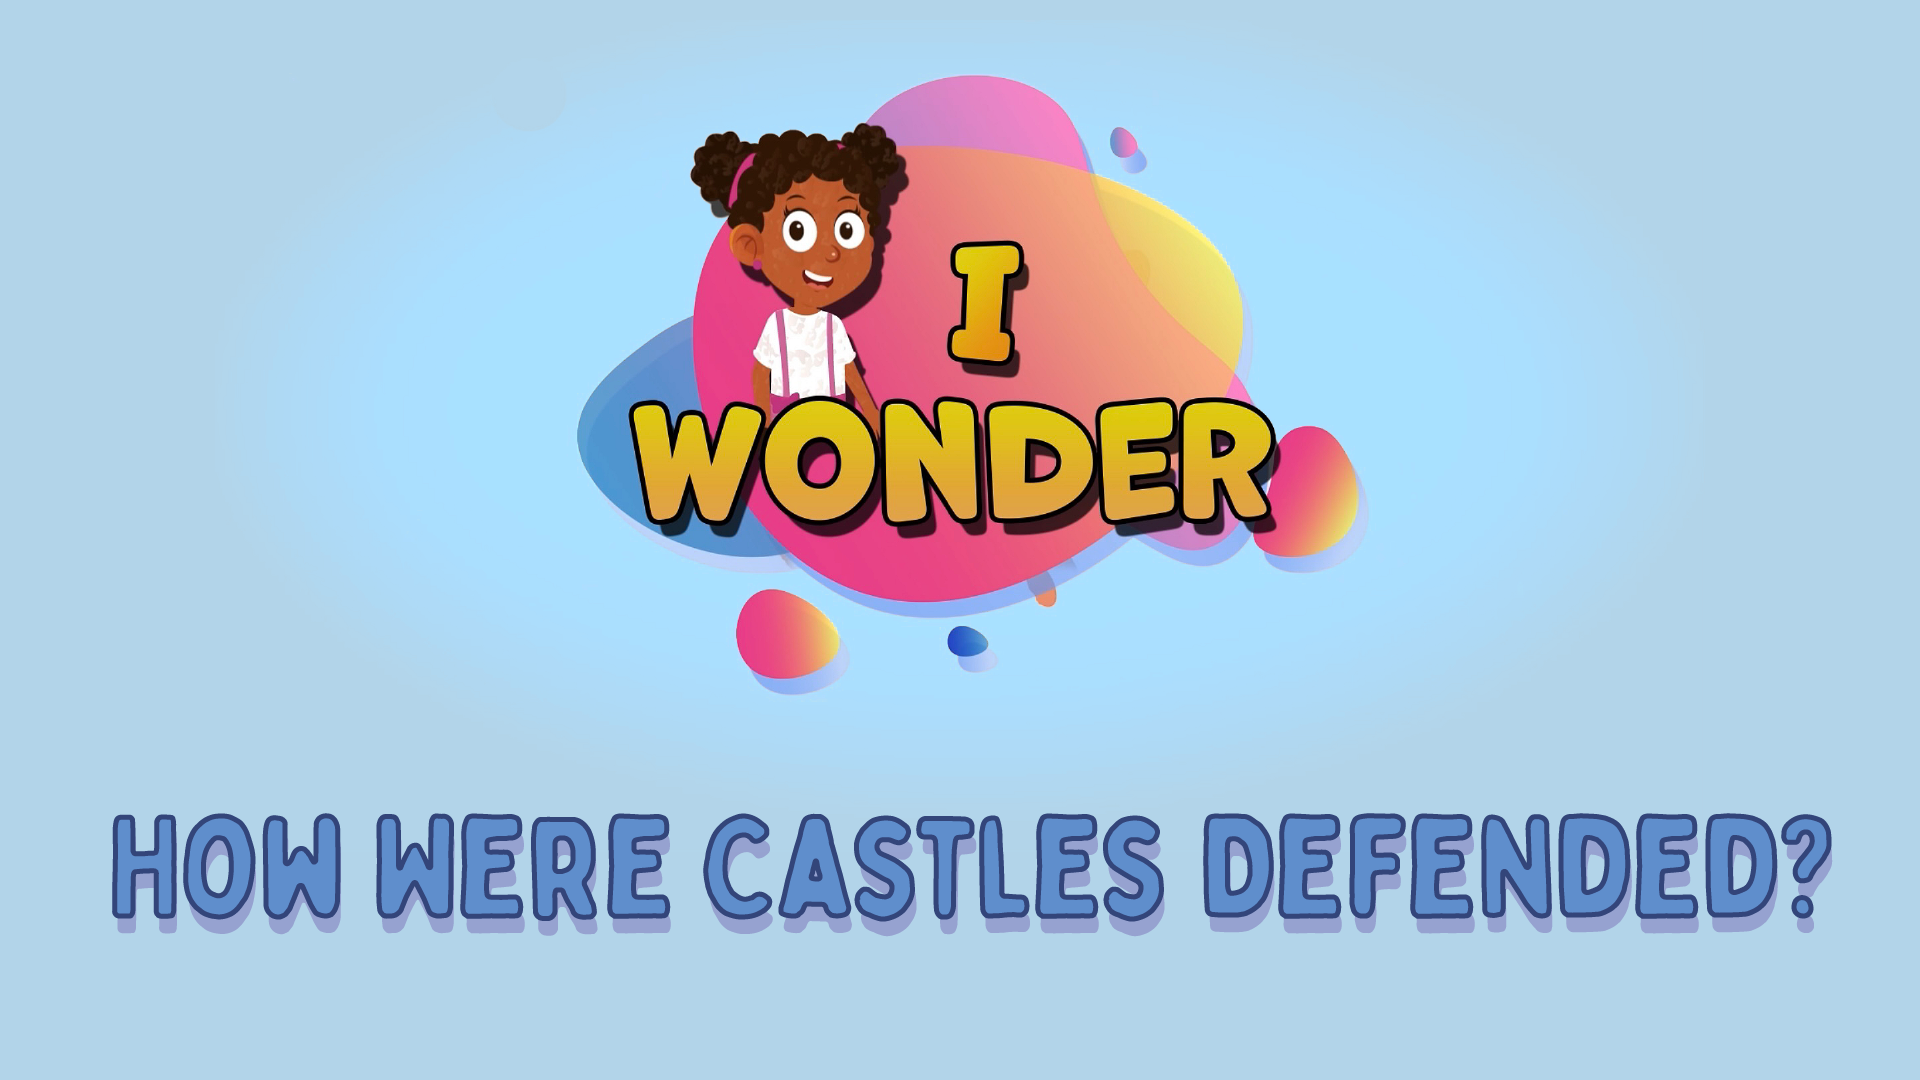 How Were Castles Defended?